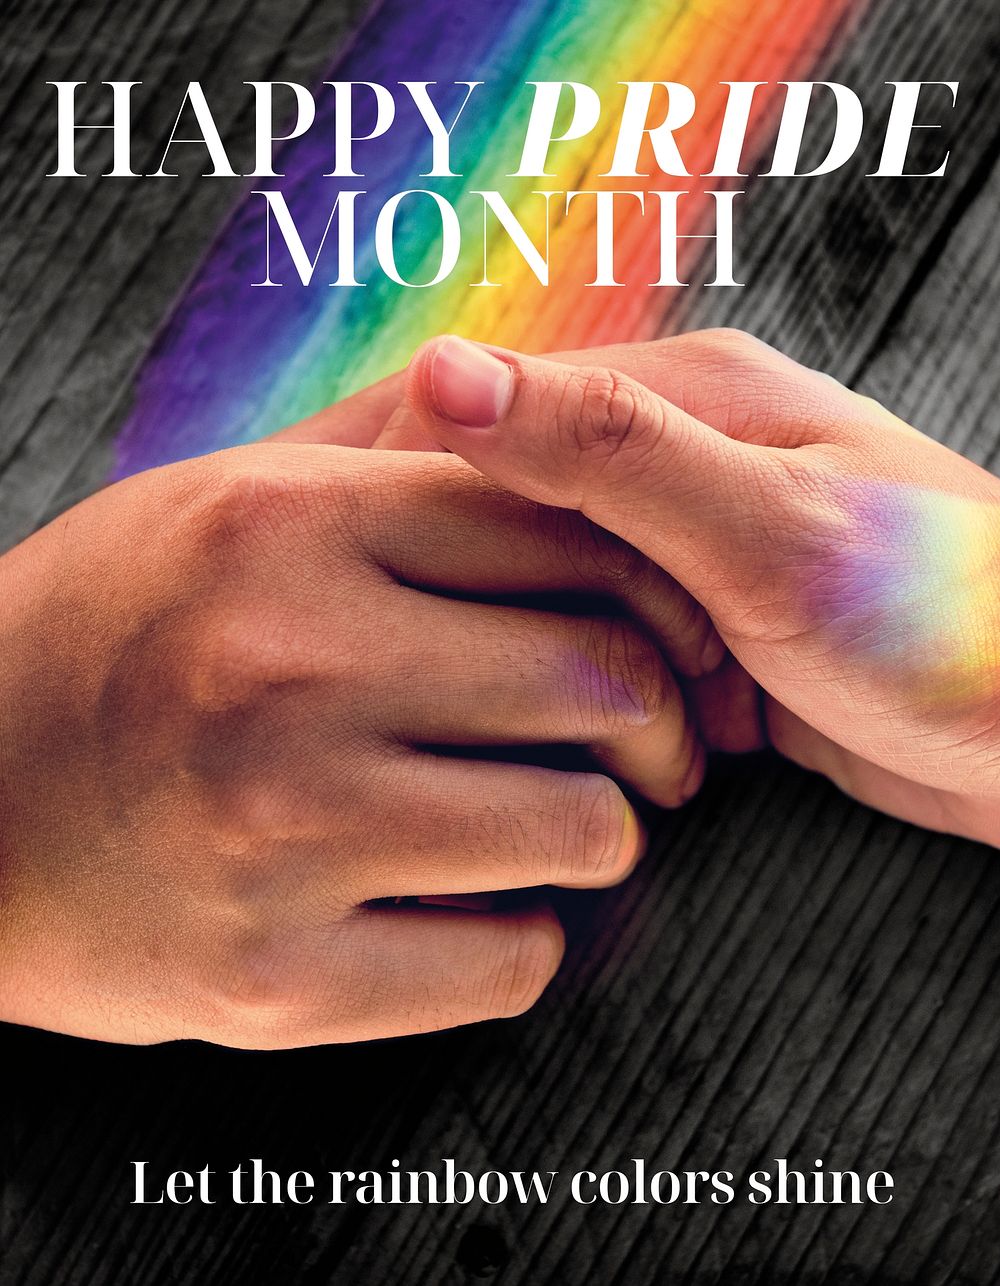 Happy Pride Month flyer template, couple holding hands photo psd